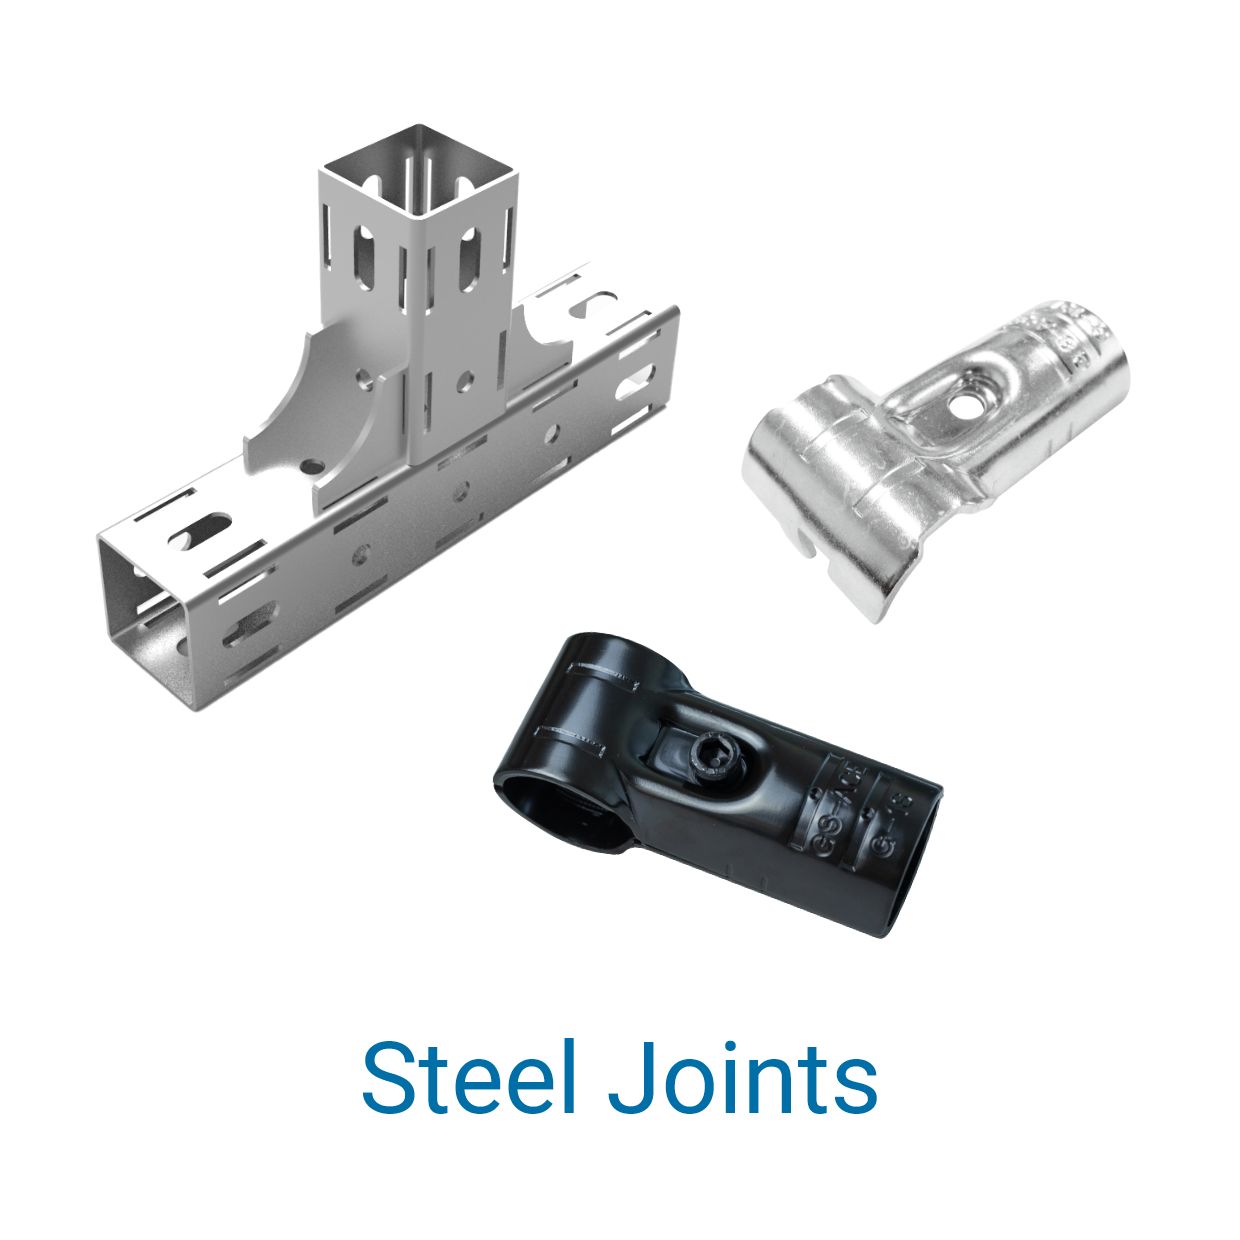 Joints made of steel from G.S. ACE (BeeWaTec)